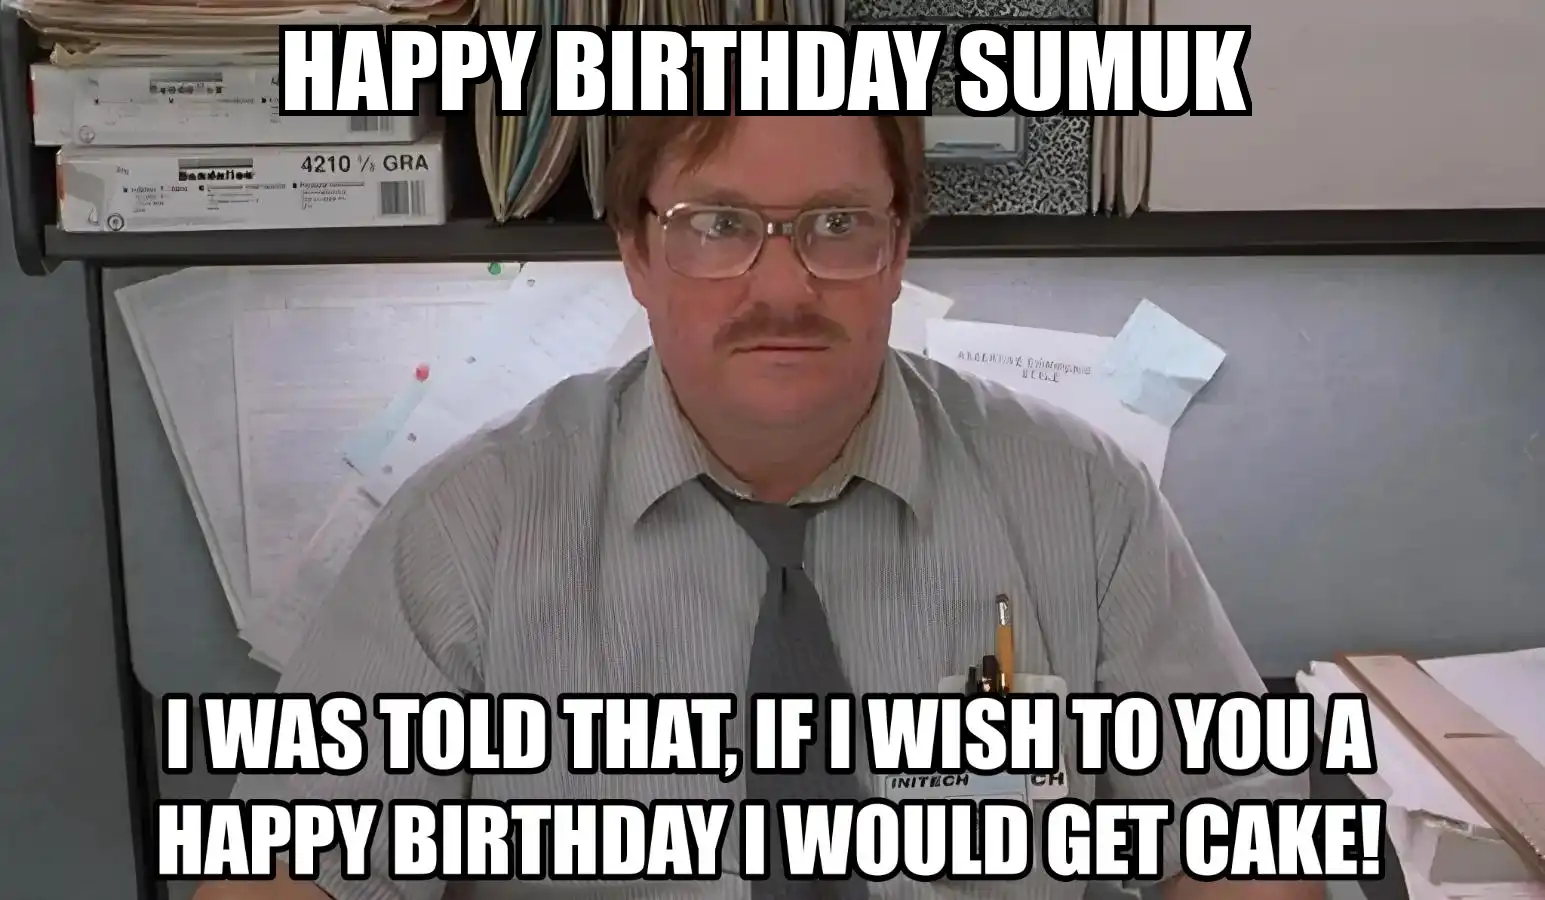 Happy Birthday Sumuk I Would Get A Cake Meme